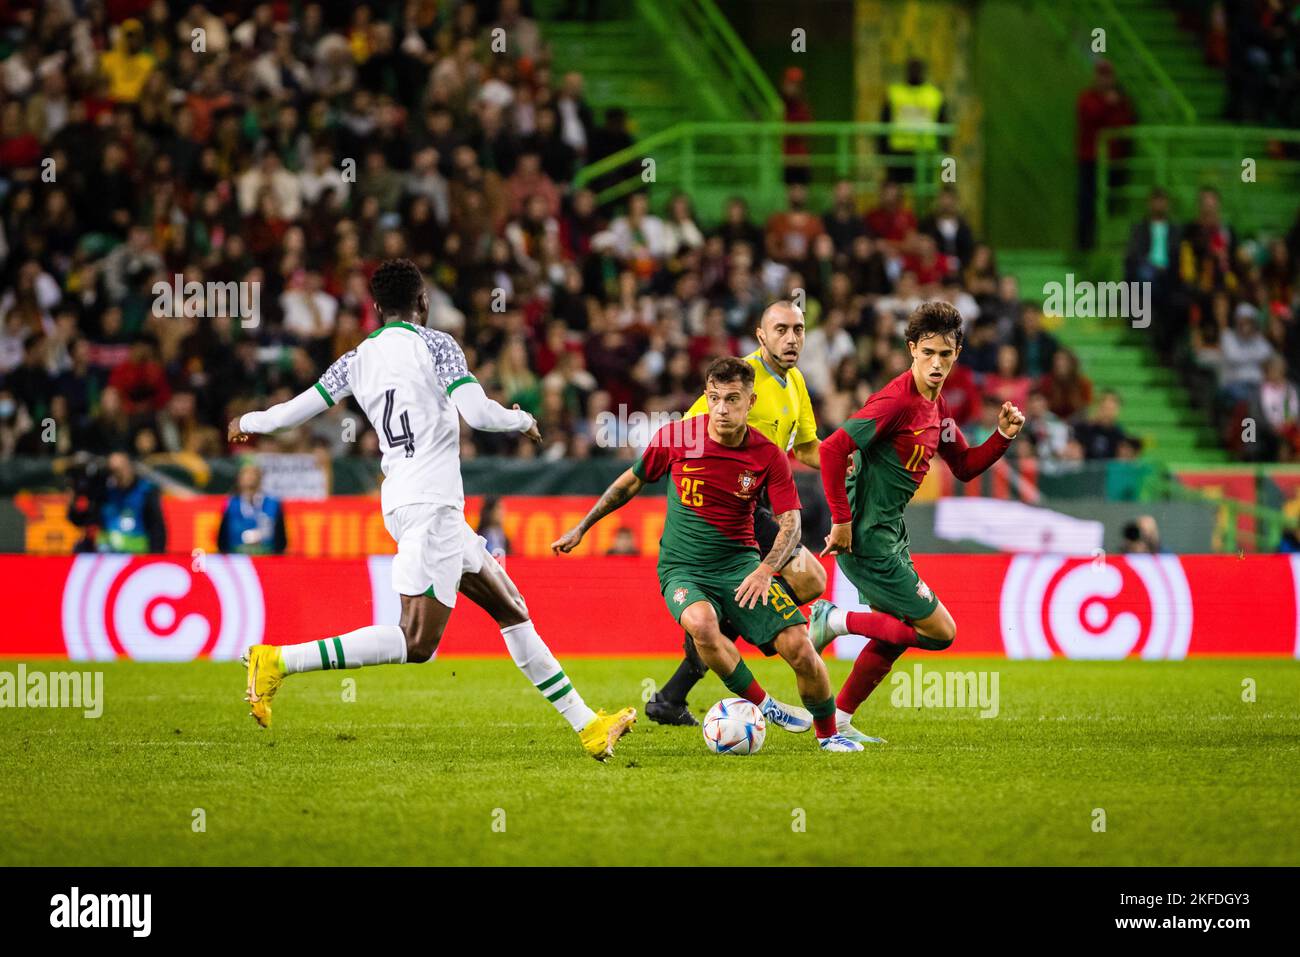 Lisbon, Portugal. 17th Nov, 2022. Otavio Monteiro (C), Joao Felix (R) of Portugal and Wilfred Ndidi of Nigeria (L) seen in action during the friendly football match between Portugal and Nigeria, at the Jose Alvalade stadium ahead of the Qatar 2022 World Cup. (Final score: Portugal 4 - 0 Nigeria) (Photo by Henrique Casinhas/SOPA Images/Sipa USA) Credit: Sipa USA/Alamy Live News Stock Photo